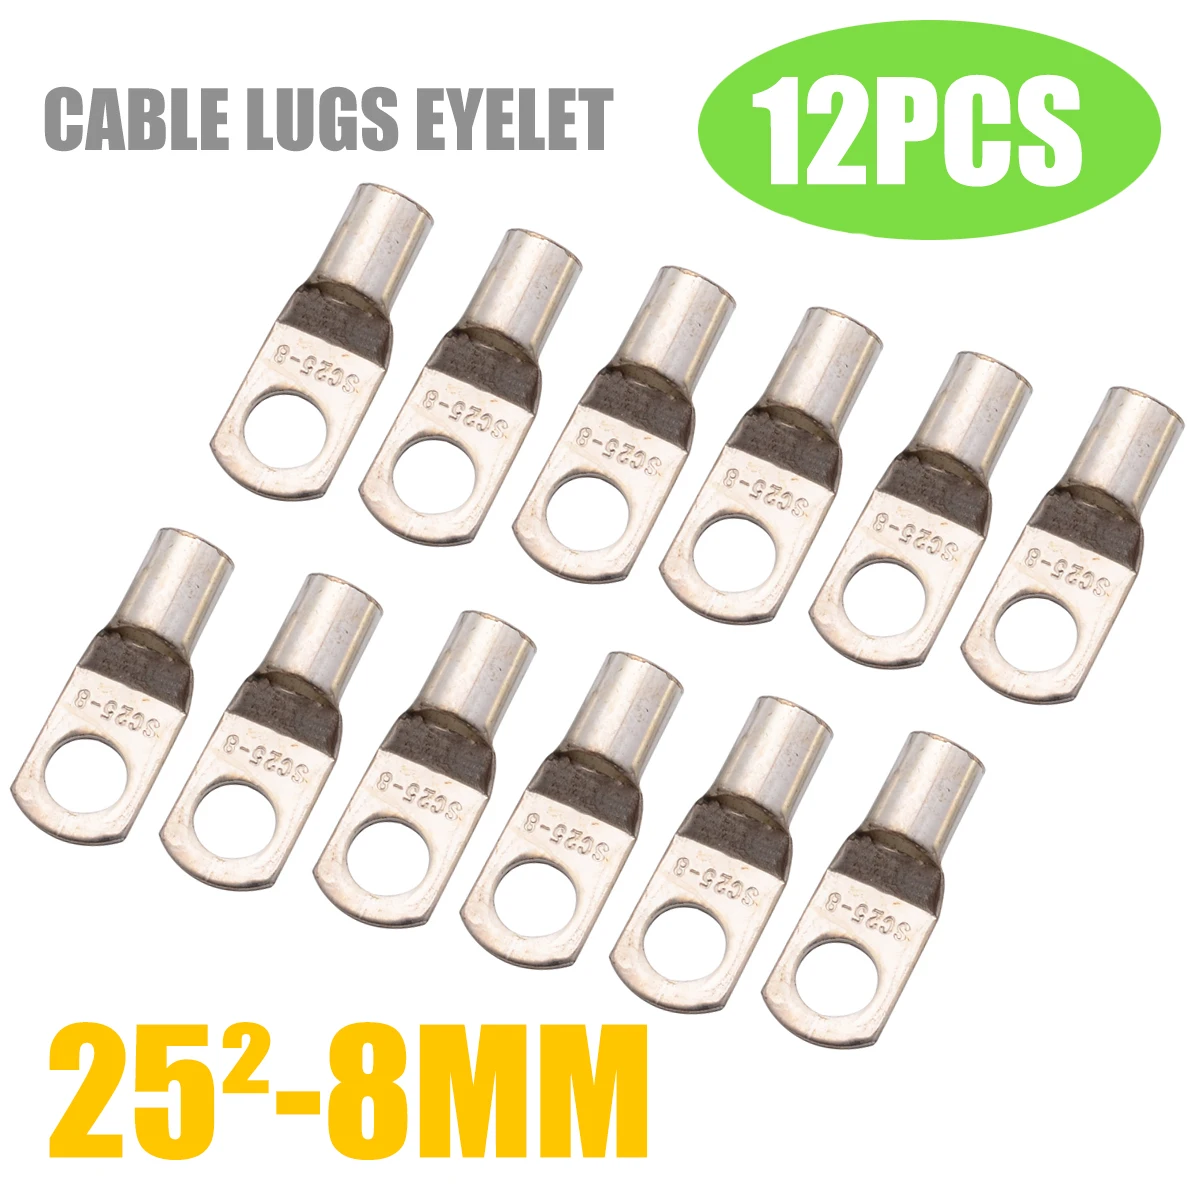 

12pcs 3AWG 5/16" Copper Ring Battery Terminals Connector Cable Lugs Eyelet 25mm-8mm Electrical Supplies Bolt Hole